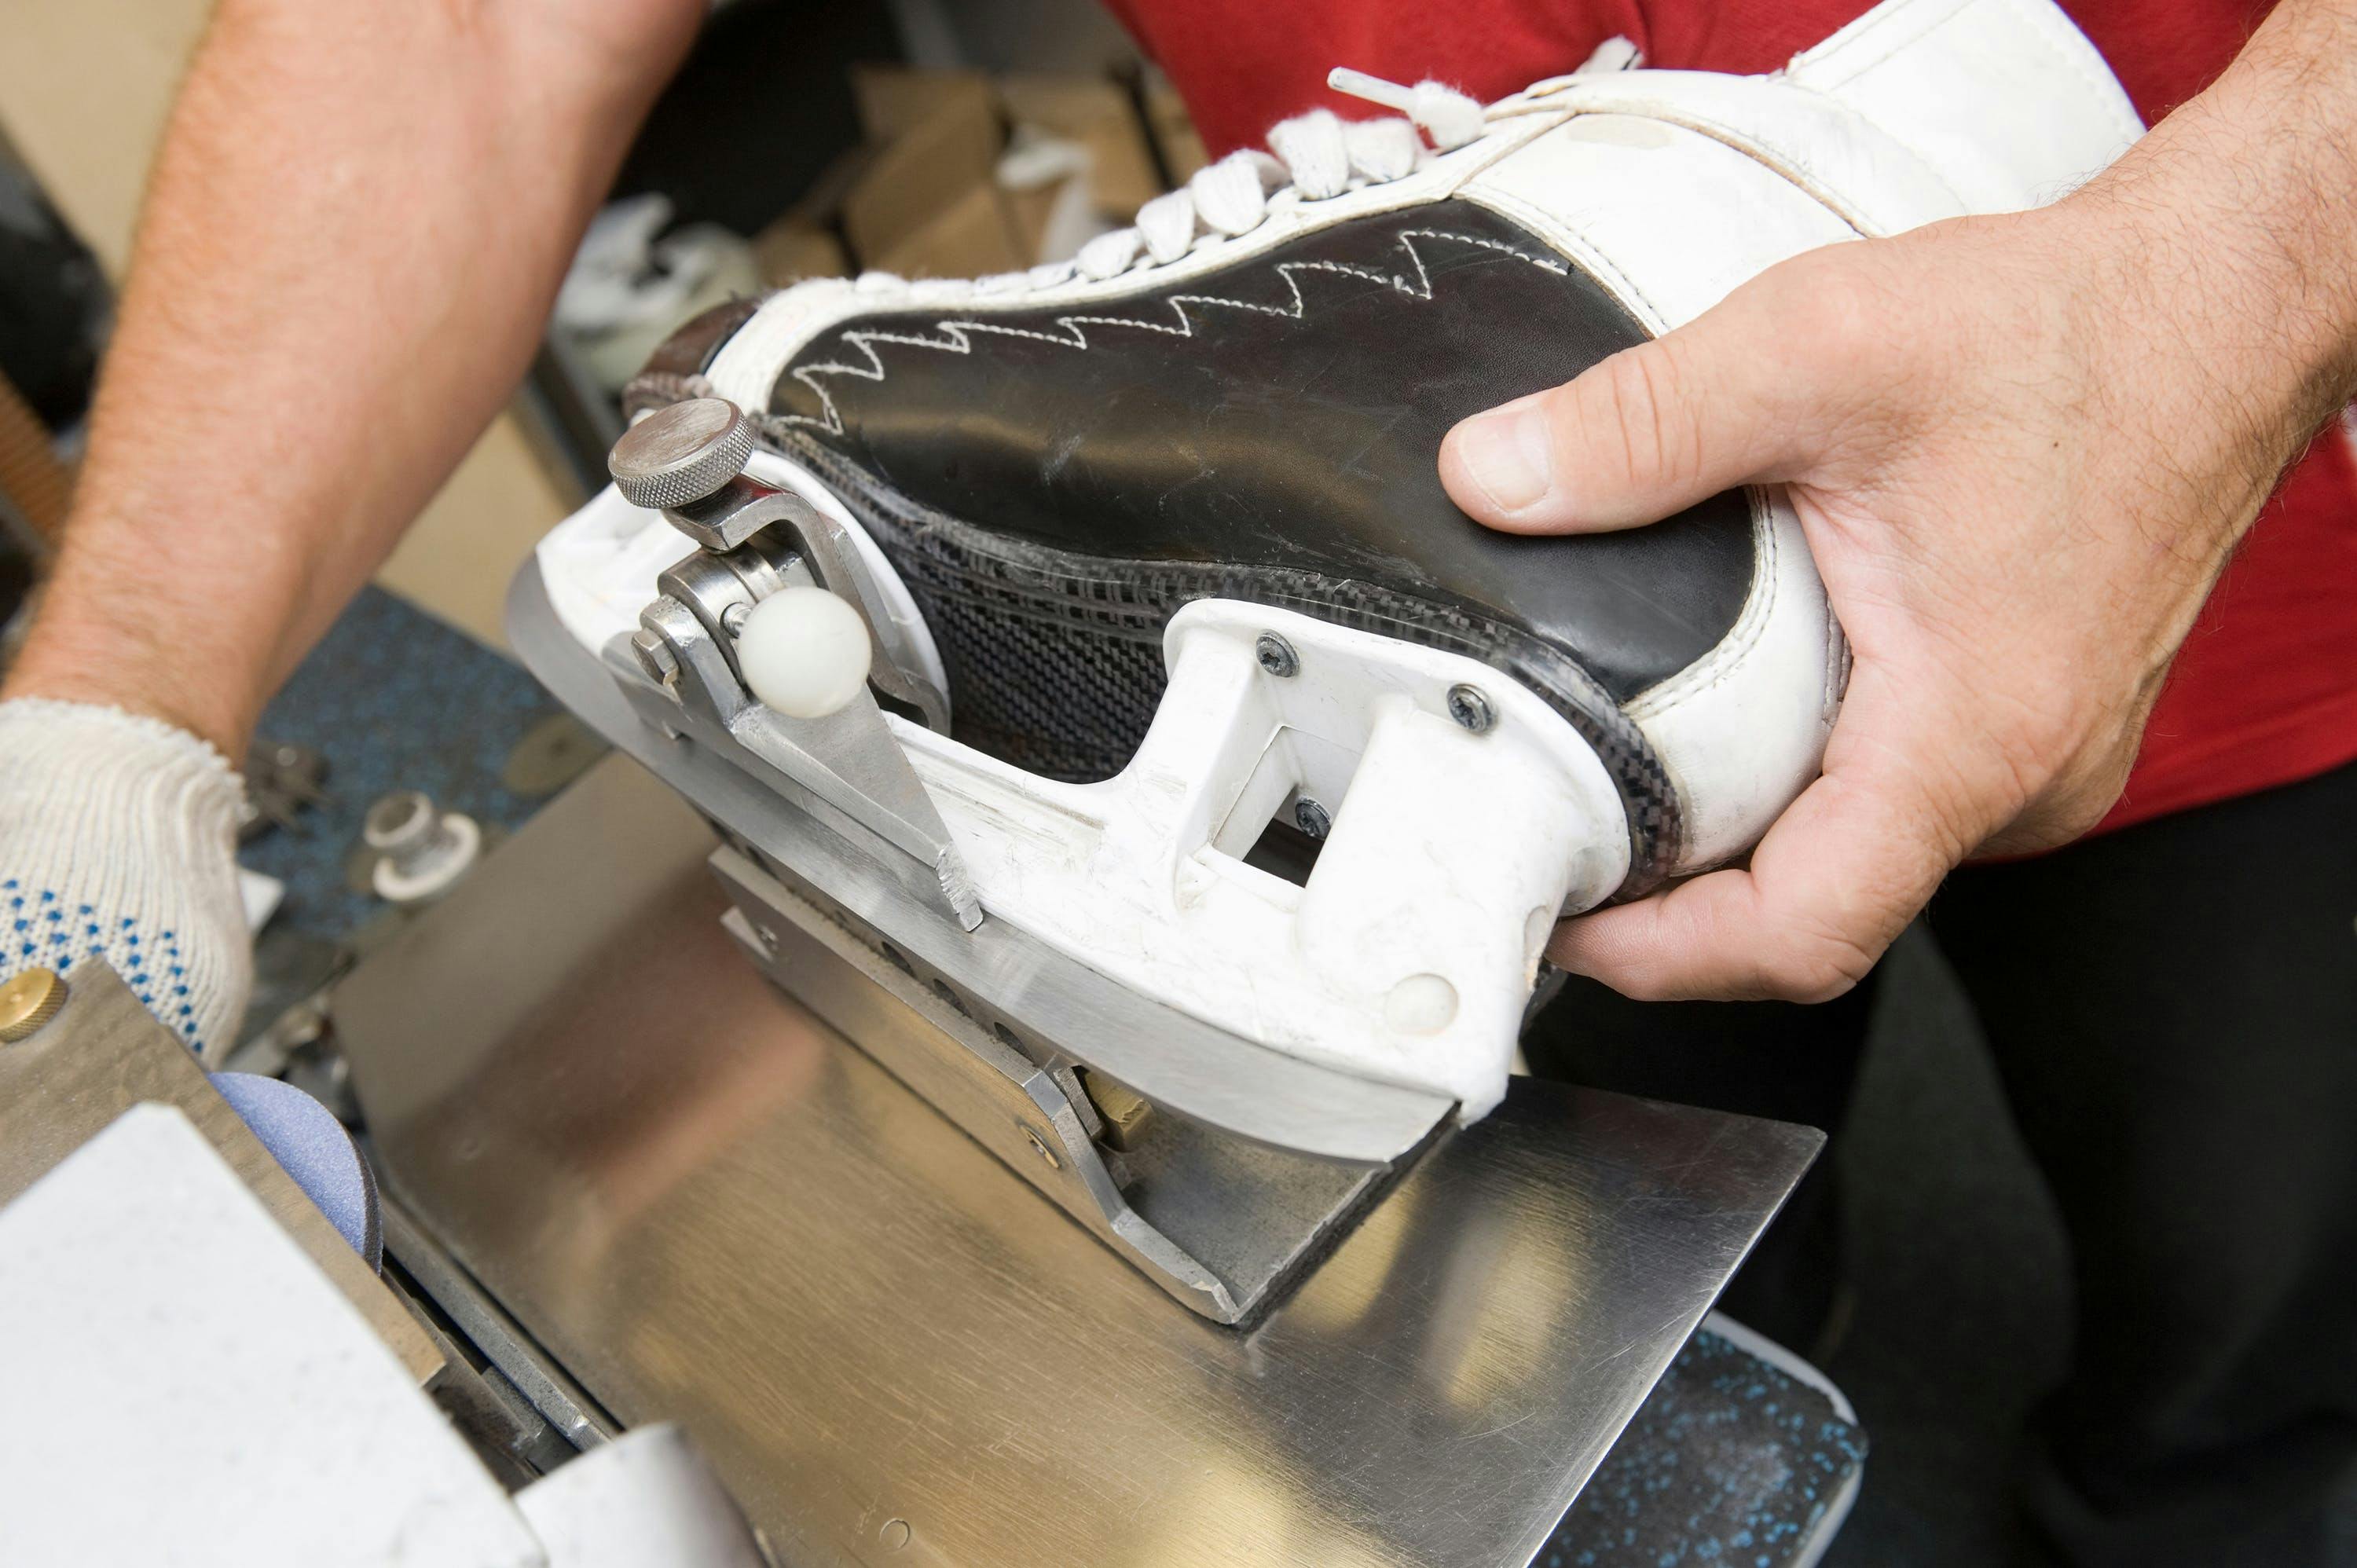 Skate Sharpening Tips and Tricks to Keep Your Skates in Top Condition